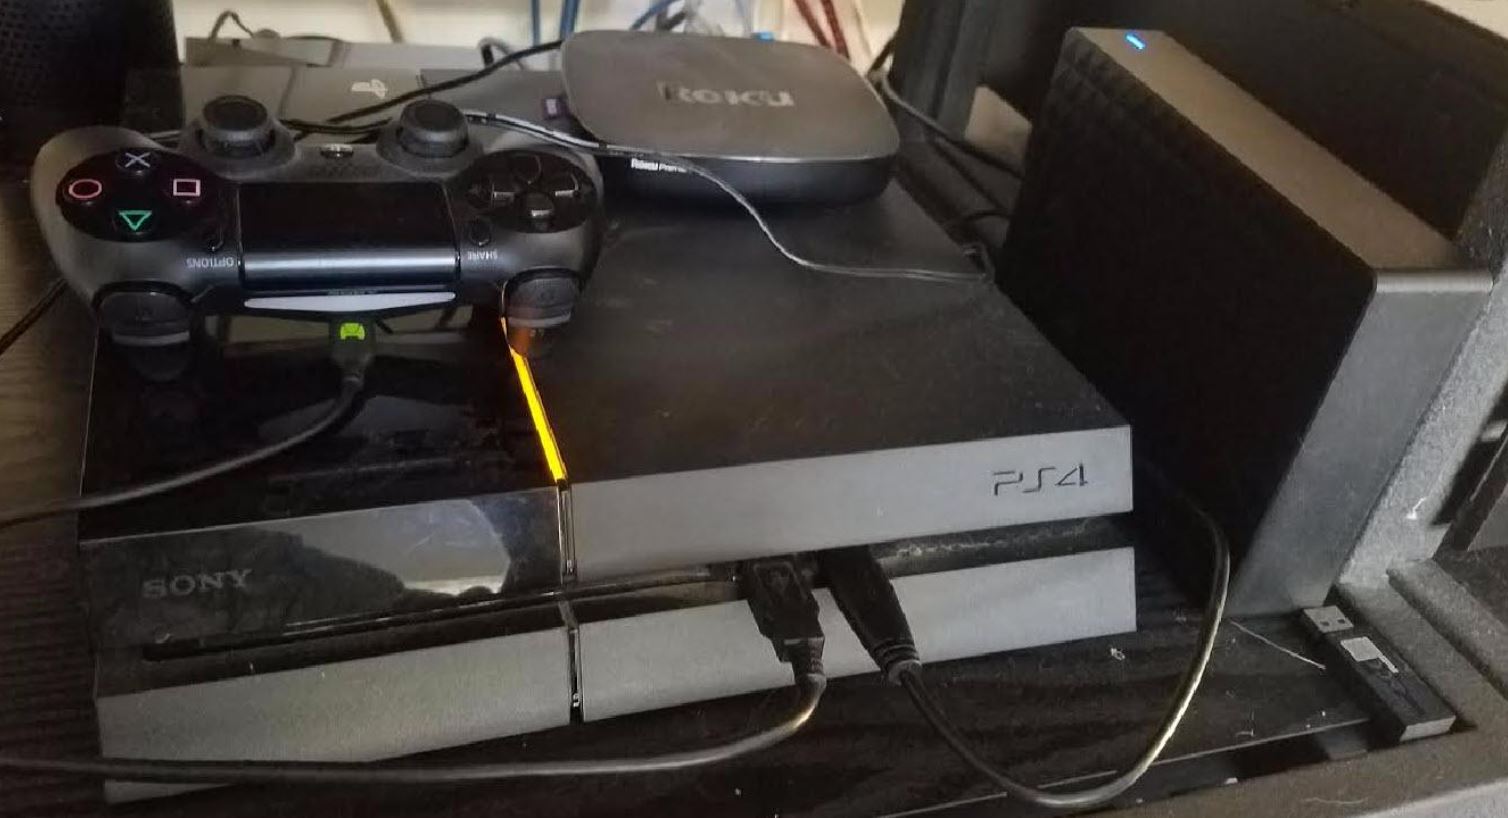 How To Hook Up External Hard Drive To PS4